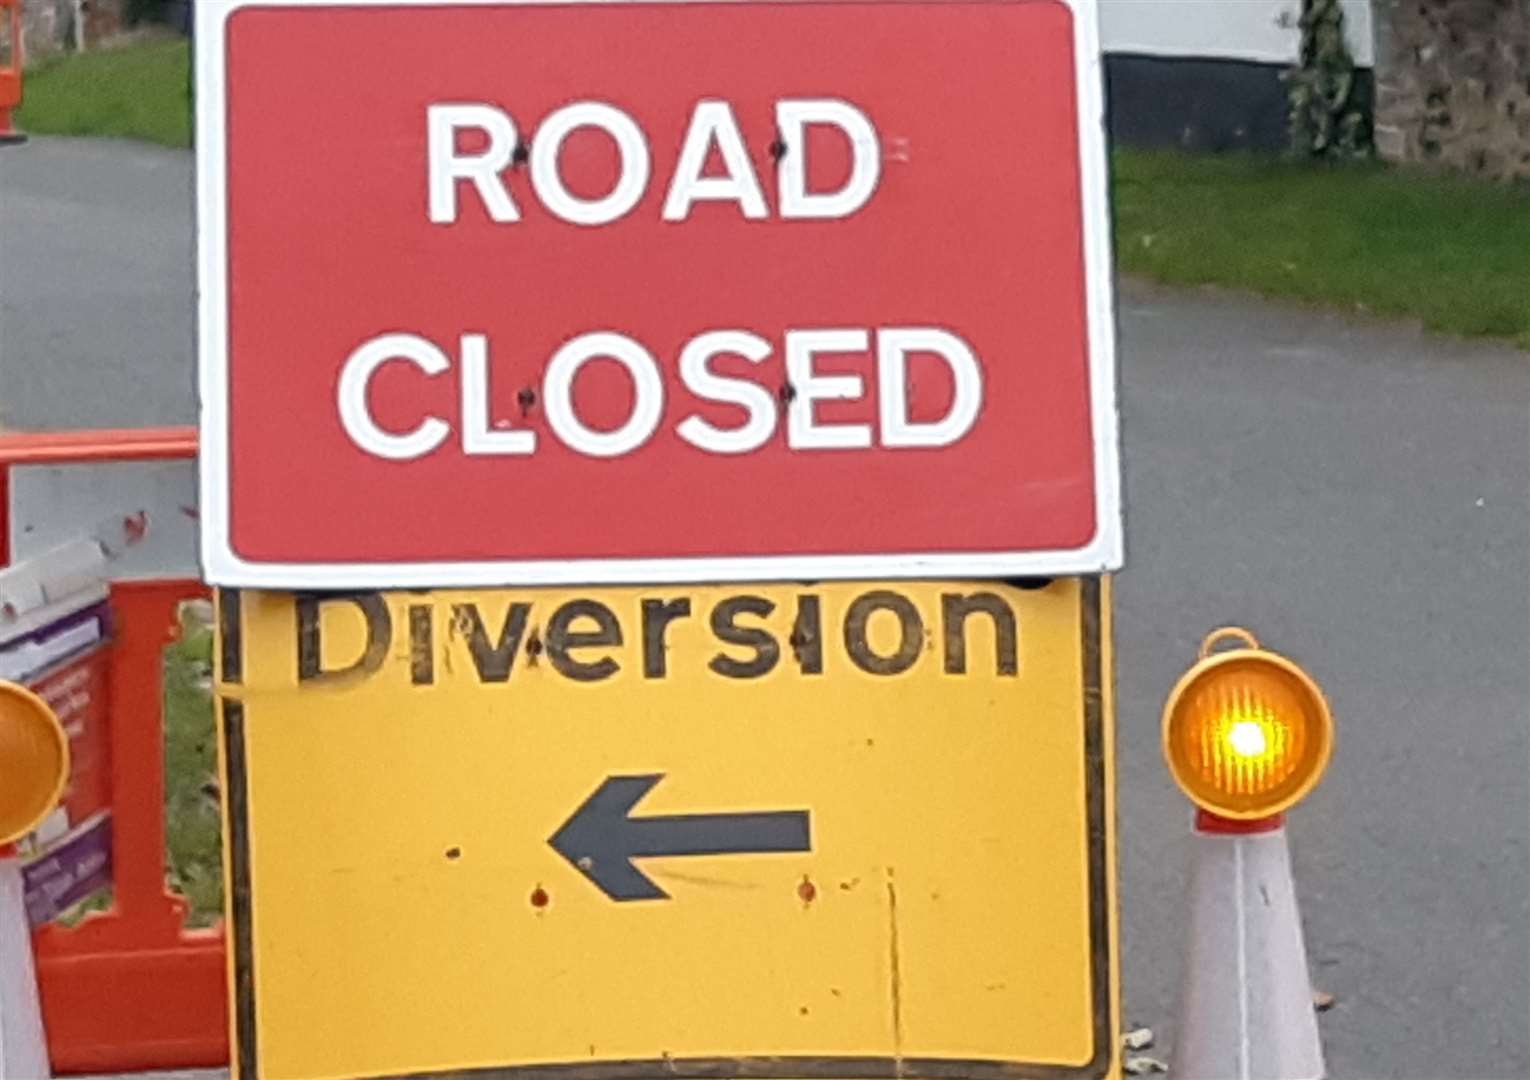 Station Road in Crayford, near Dartford has been closed in part to fix a water leak